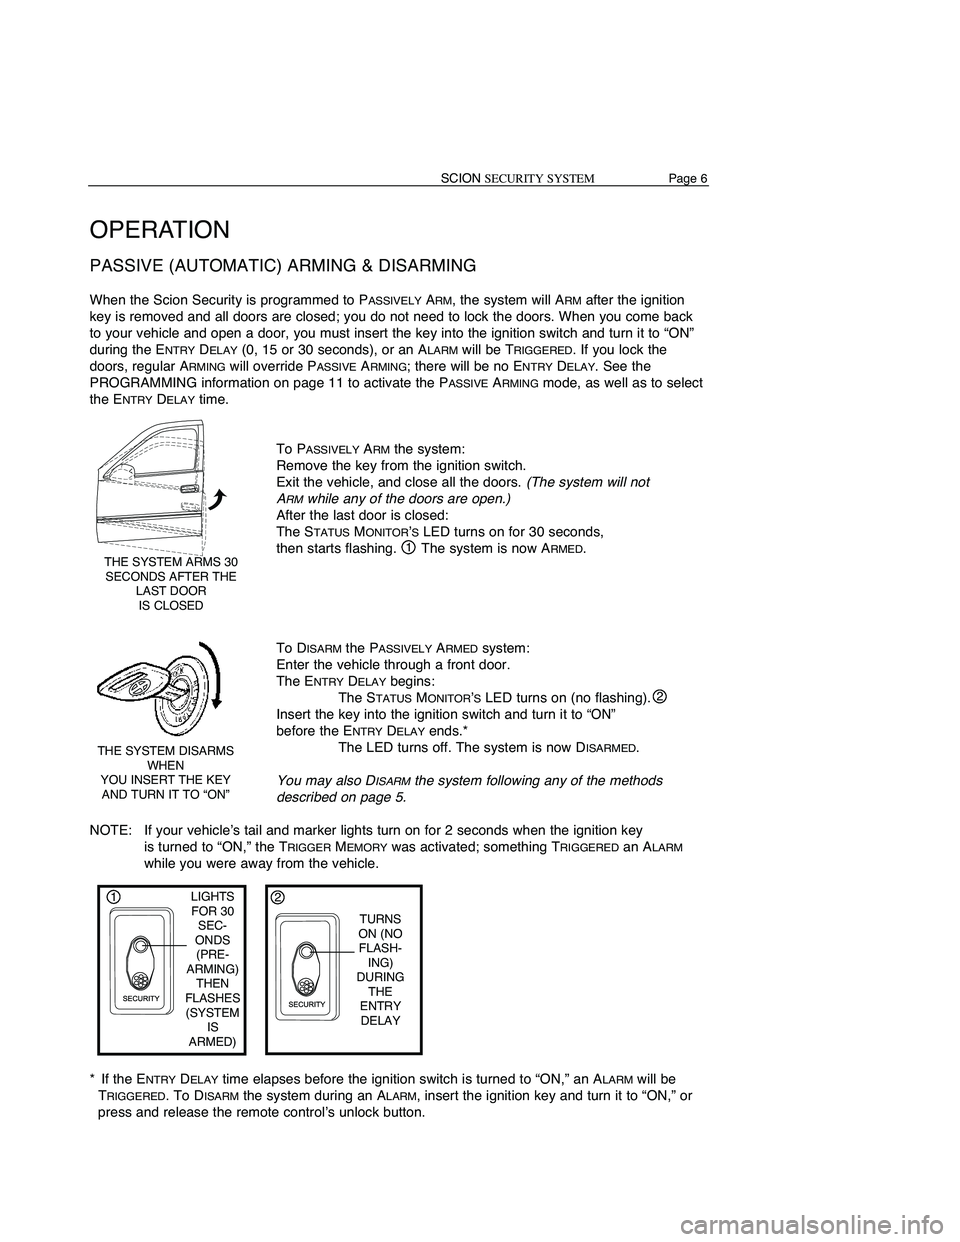 TOYOTA xD 2009  Accessories, Audio & Navigation (in English) SCIONSECURITYSYSTEM Page6
OPERA TION
PASSIVE (AUTOMATIC) ARMING&DISARM ING
WhentheScion Security isprogrammed toPASSIVELYARM,the system willARMafter theignition
key isremoved andalldoors areclosed; yo